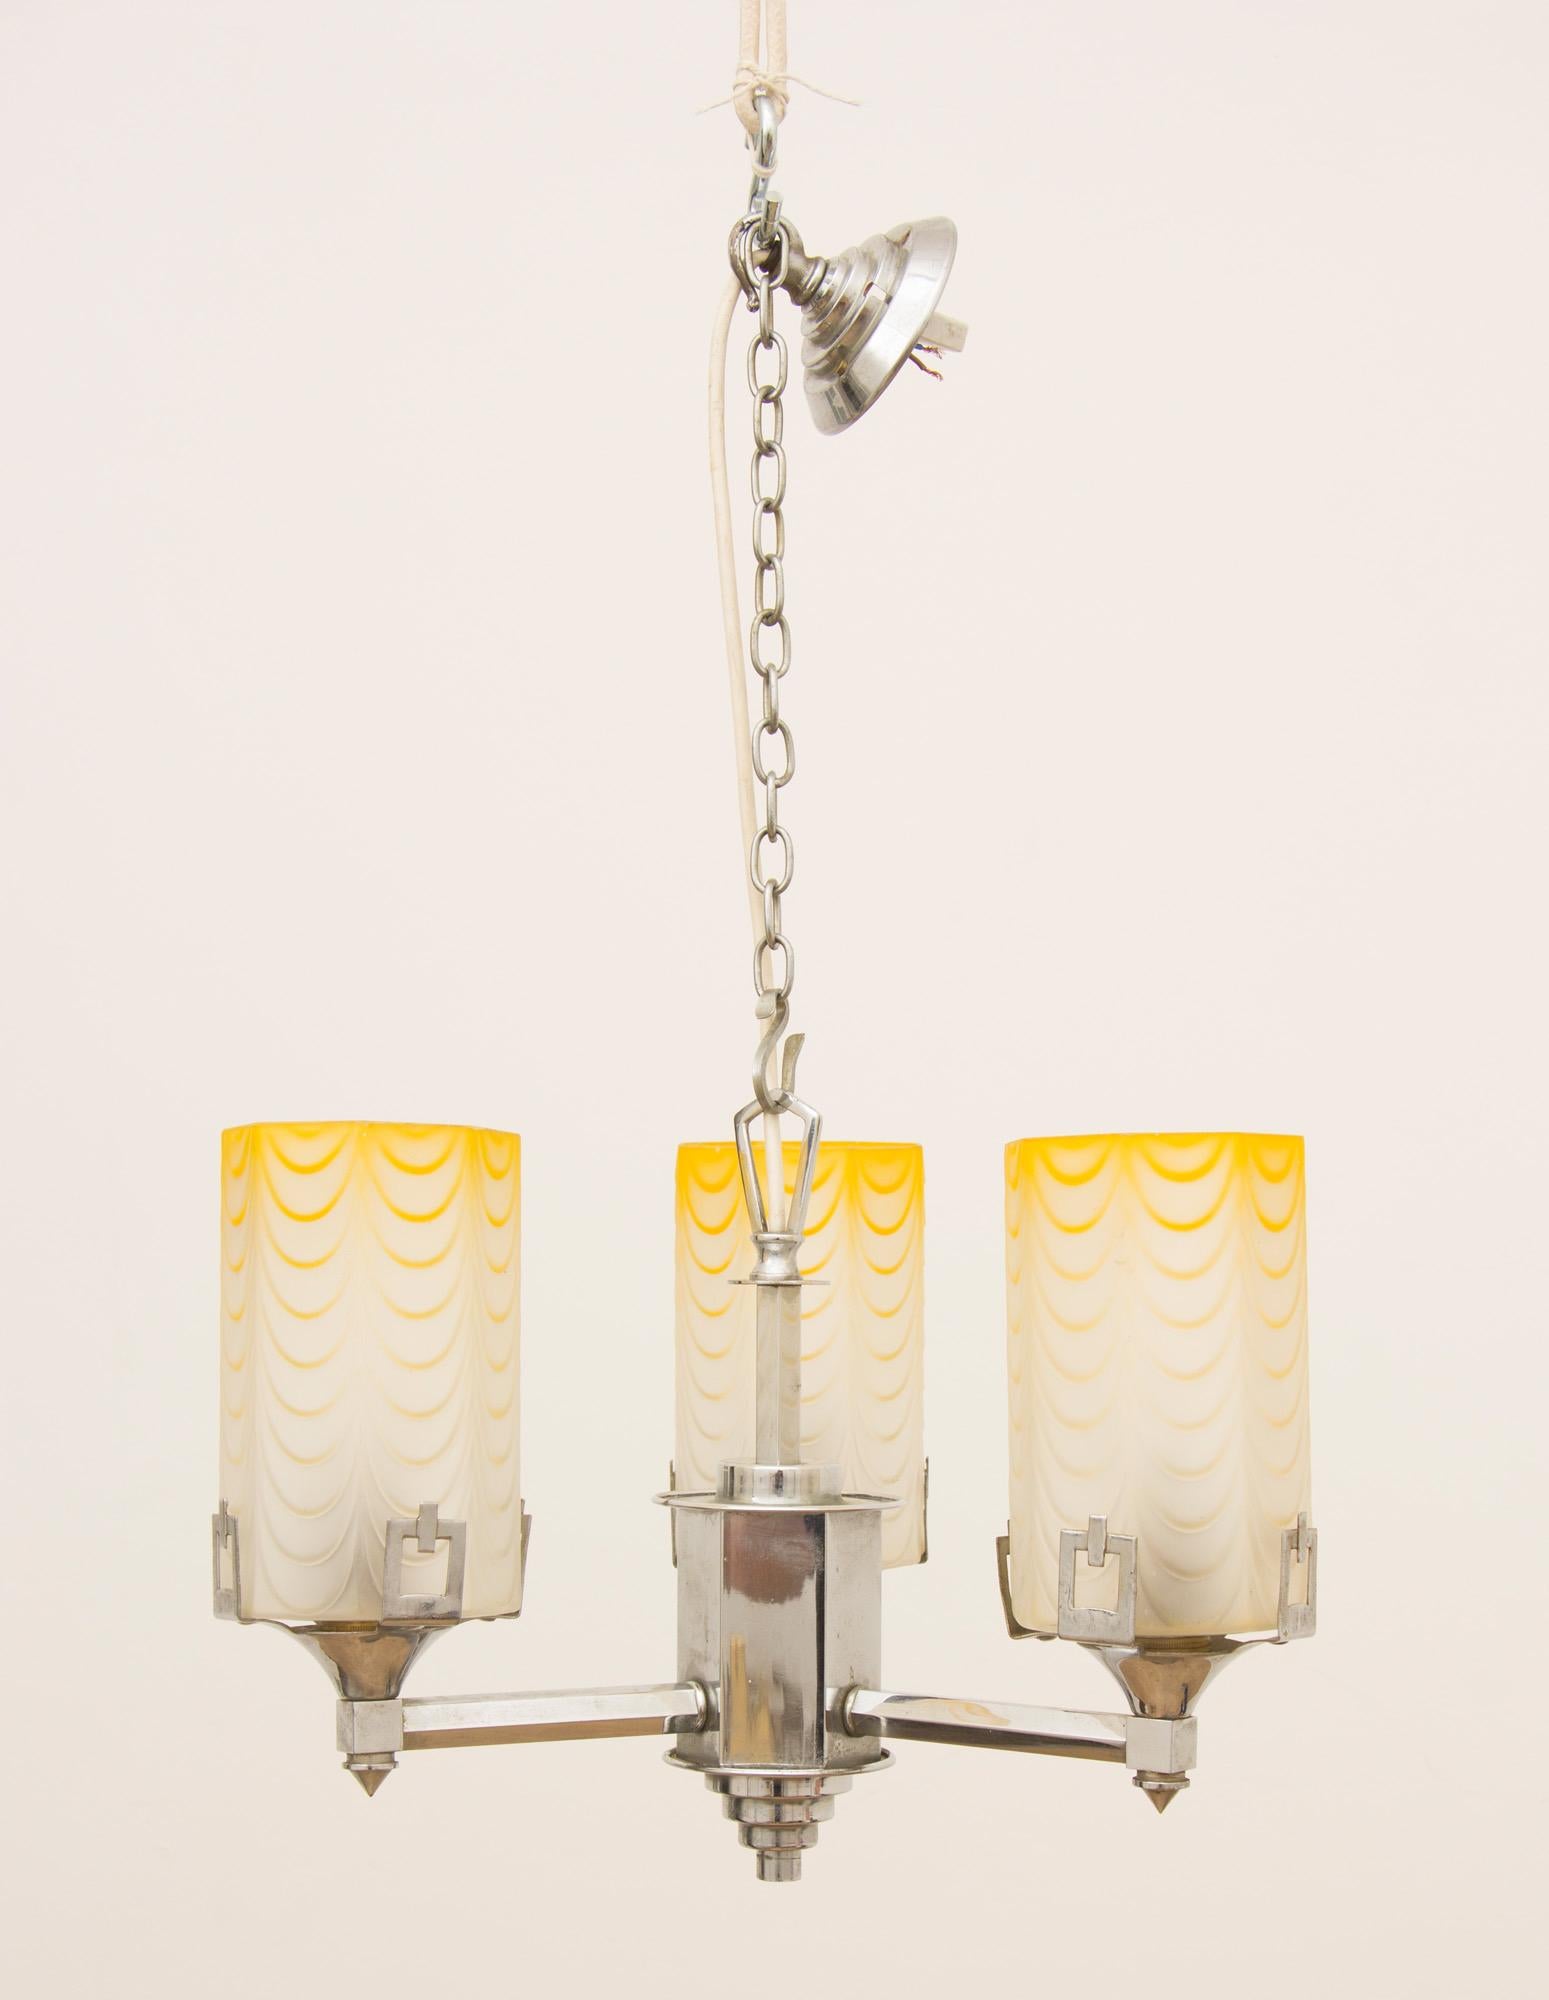 Art Deco ceiling light.
Art Deco three branch chandeliers with original yellow swaged glass cylinders, nice stepped chrome base to the column, the shades are held in place with three squared chrome clips.
The drop can be adjusted with